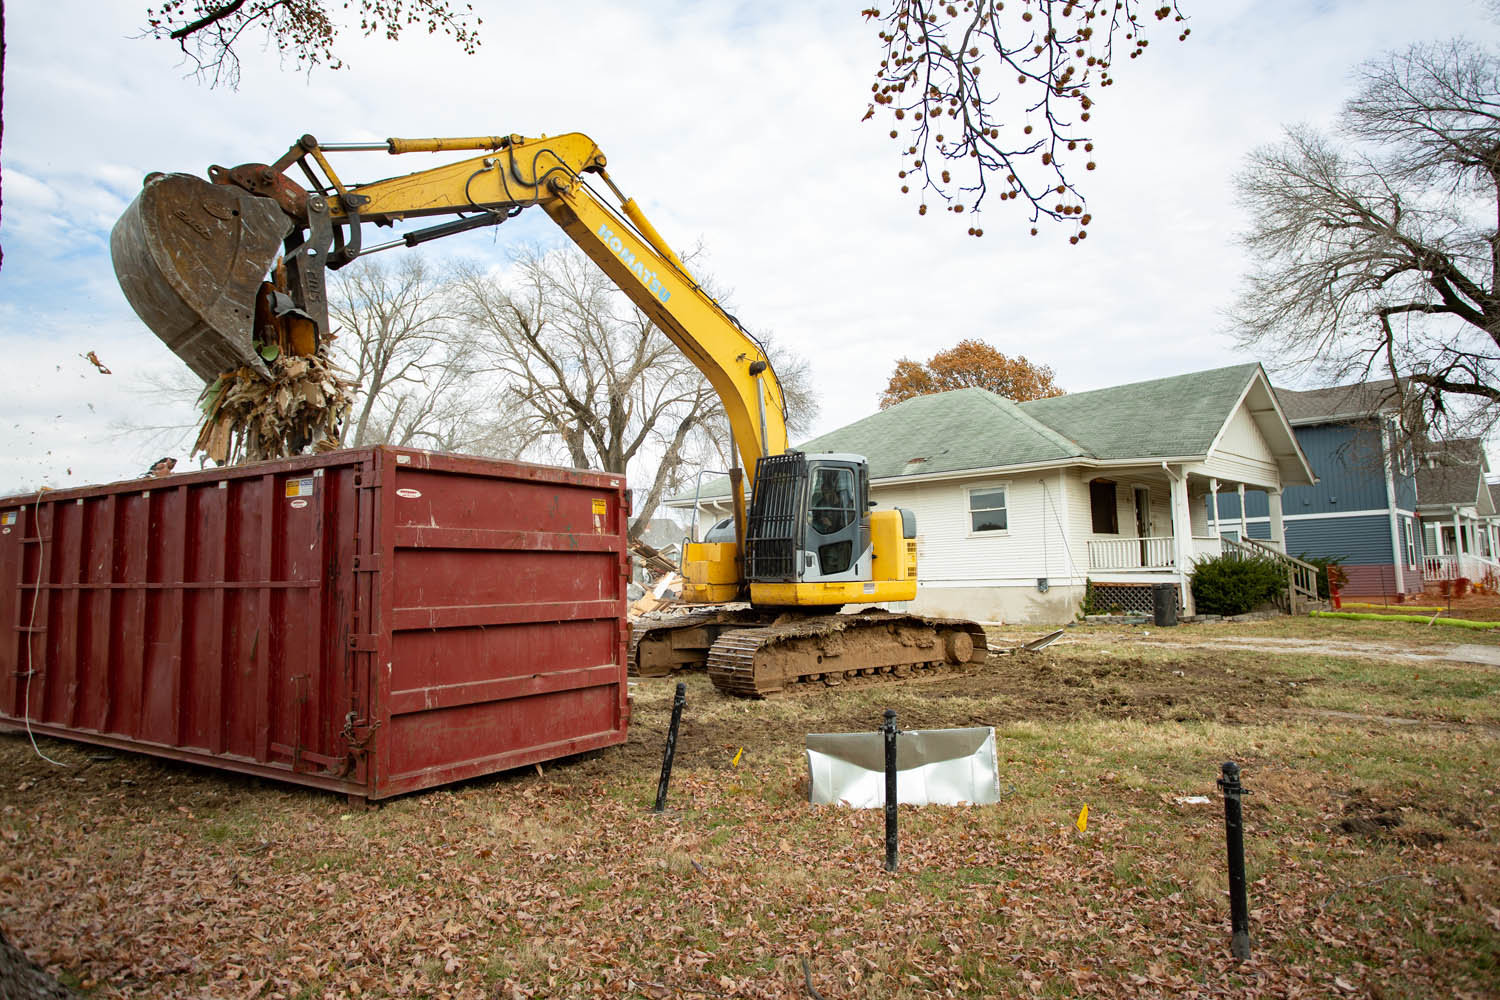 Several houses on East Cherry Street are being demolished to accommodate a residential development.